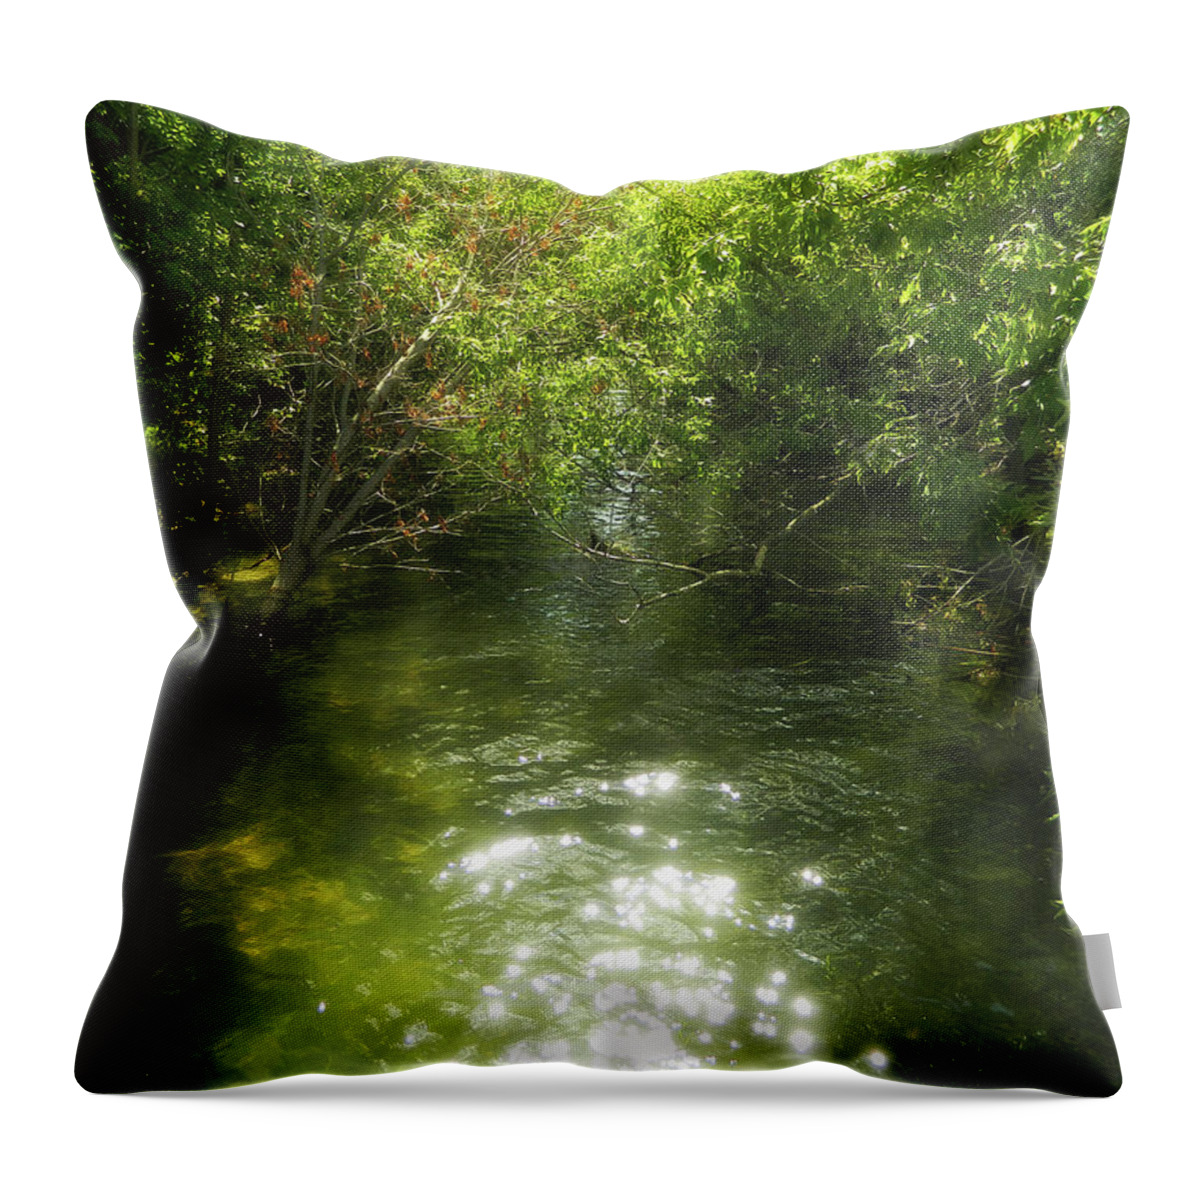 Found A New Place Throw Pillow featuring the photograph Found A New Place by Cyryn Fyrcyd